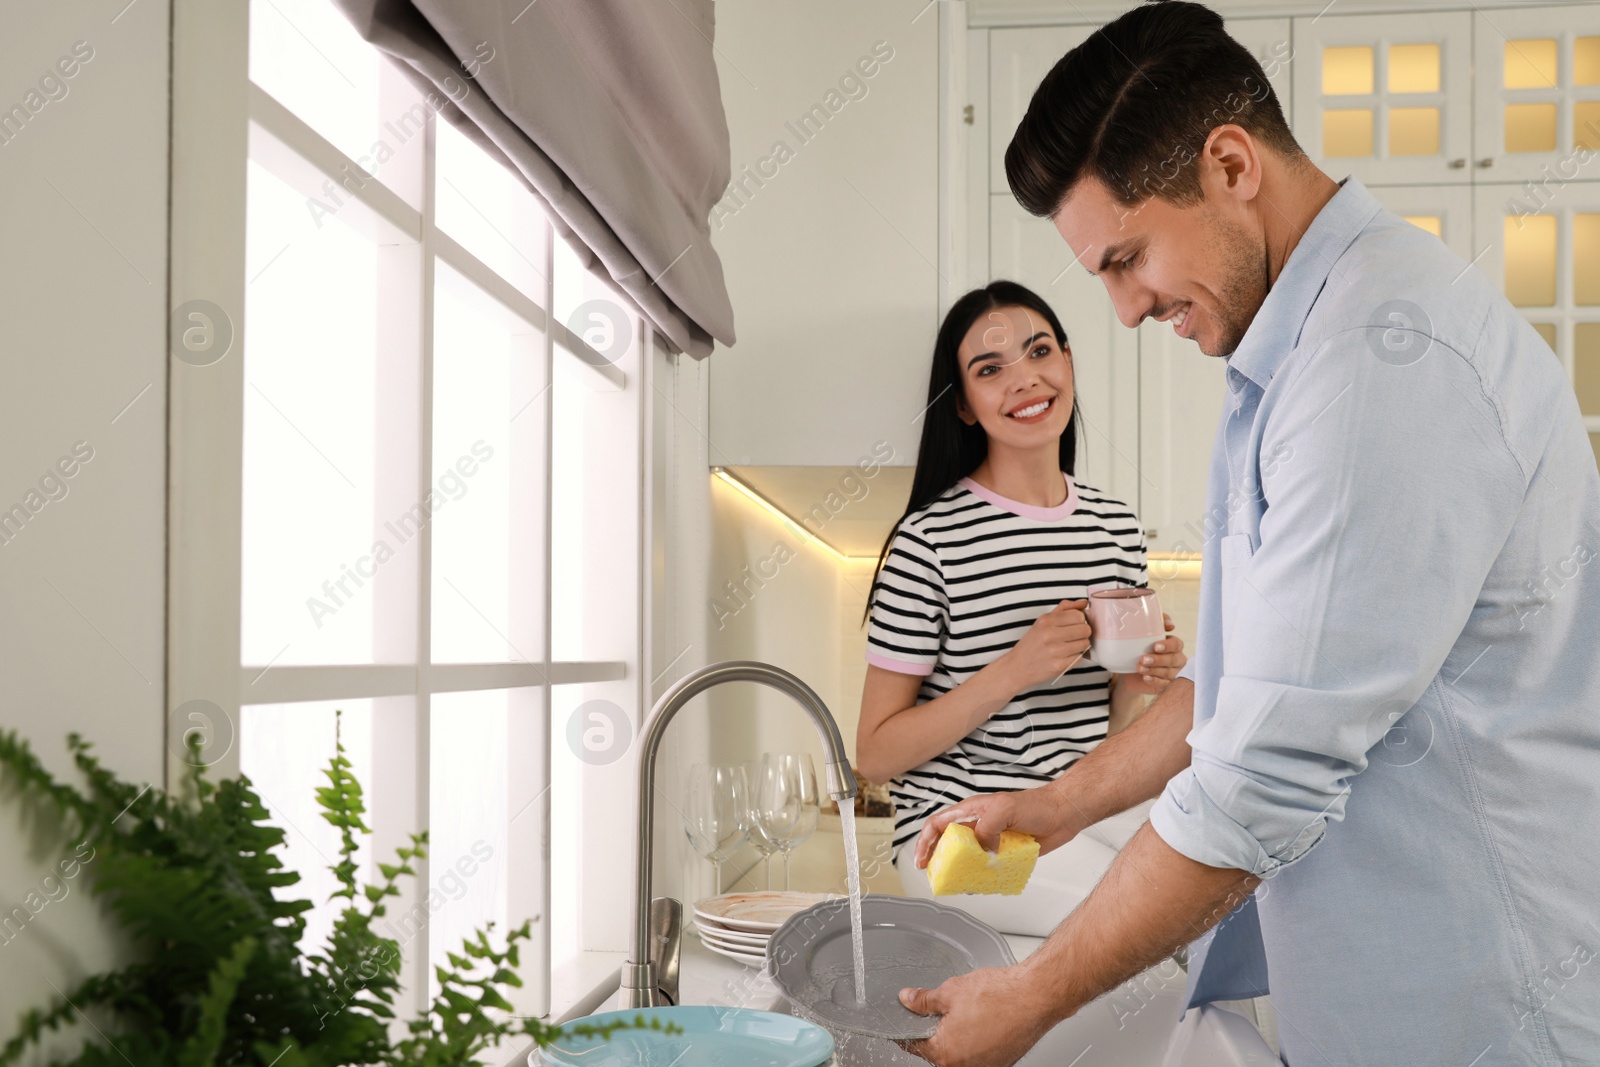 Photo of Man washing plate and talking with woman in kitchen